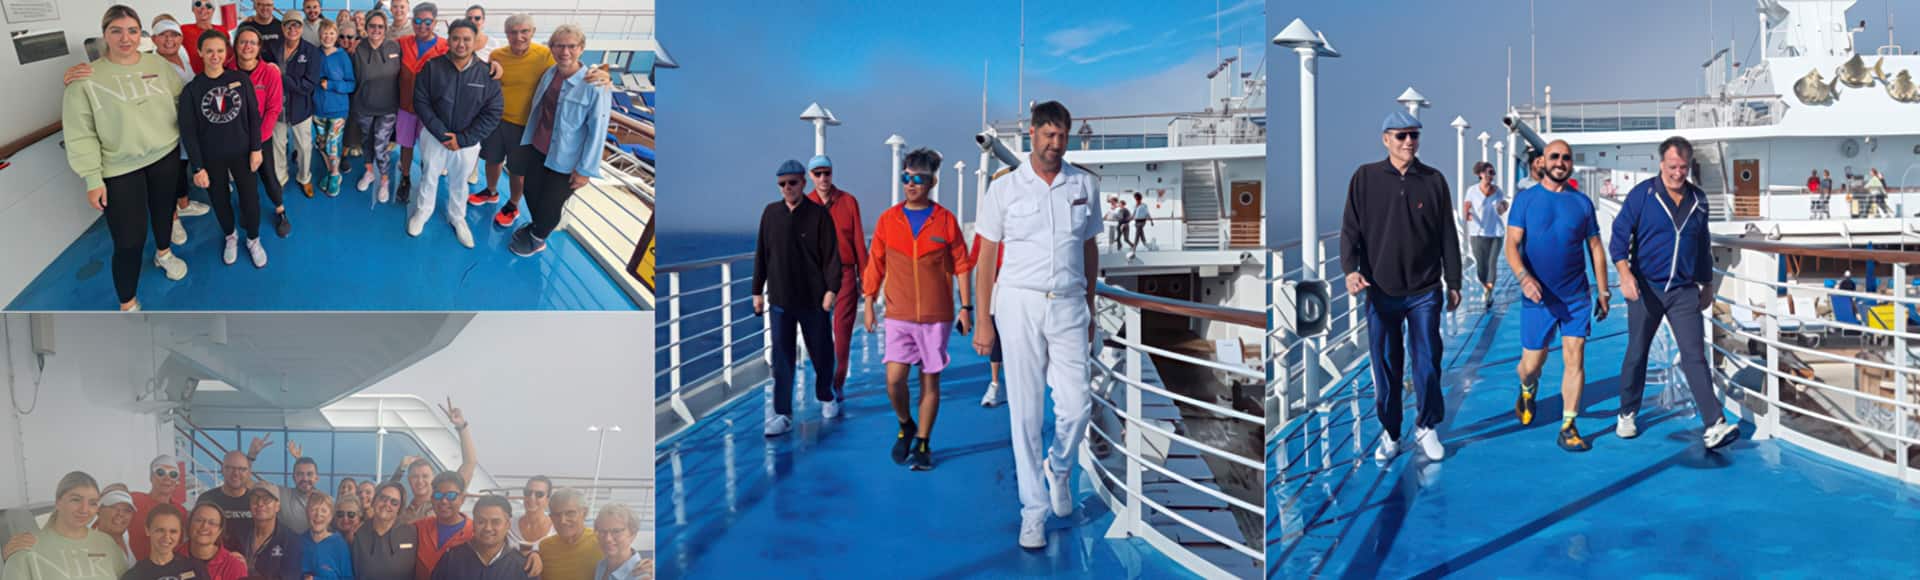 Oceania Cruises Collaborates with the American Cancer Society Launching Relay For Life at Sea